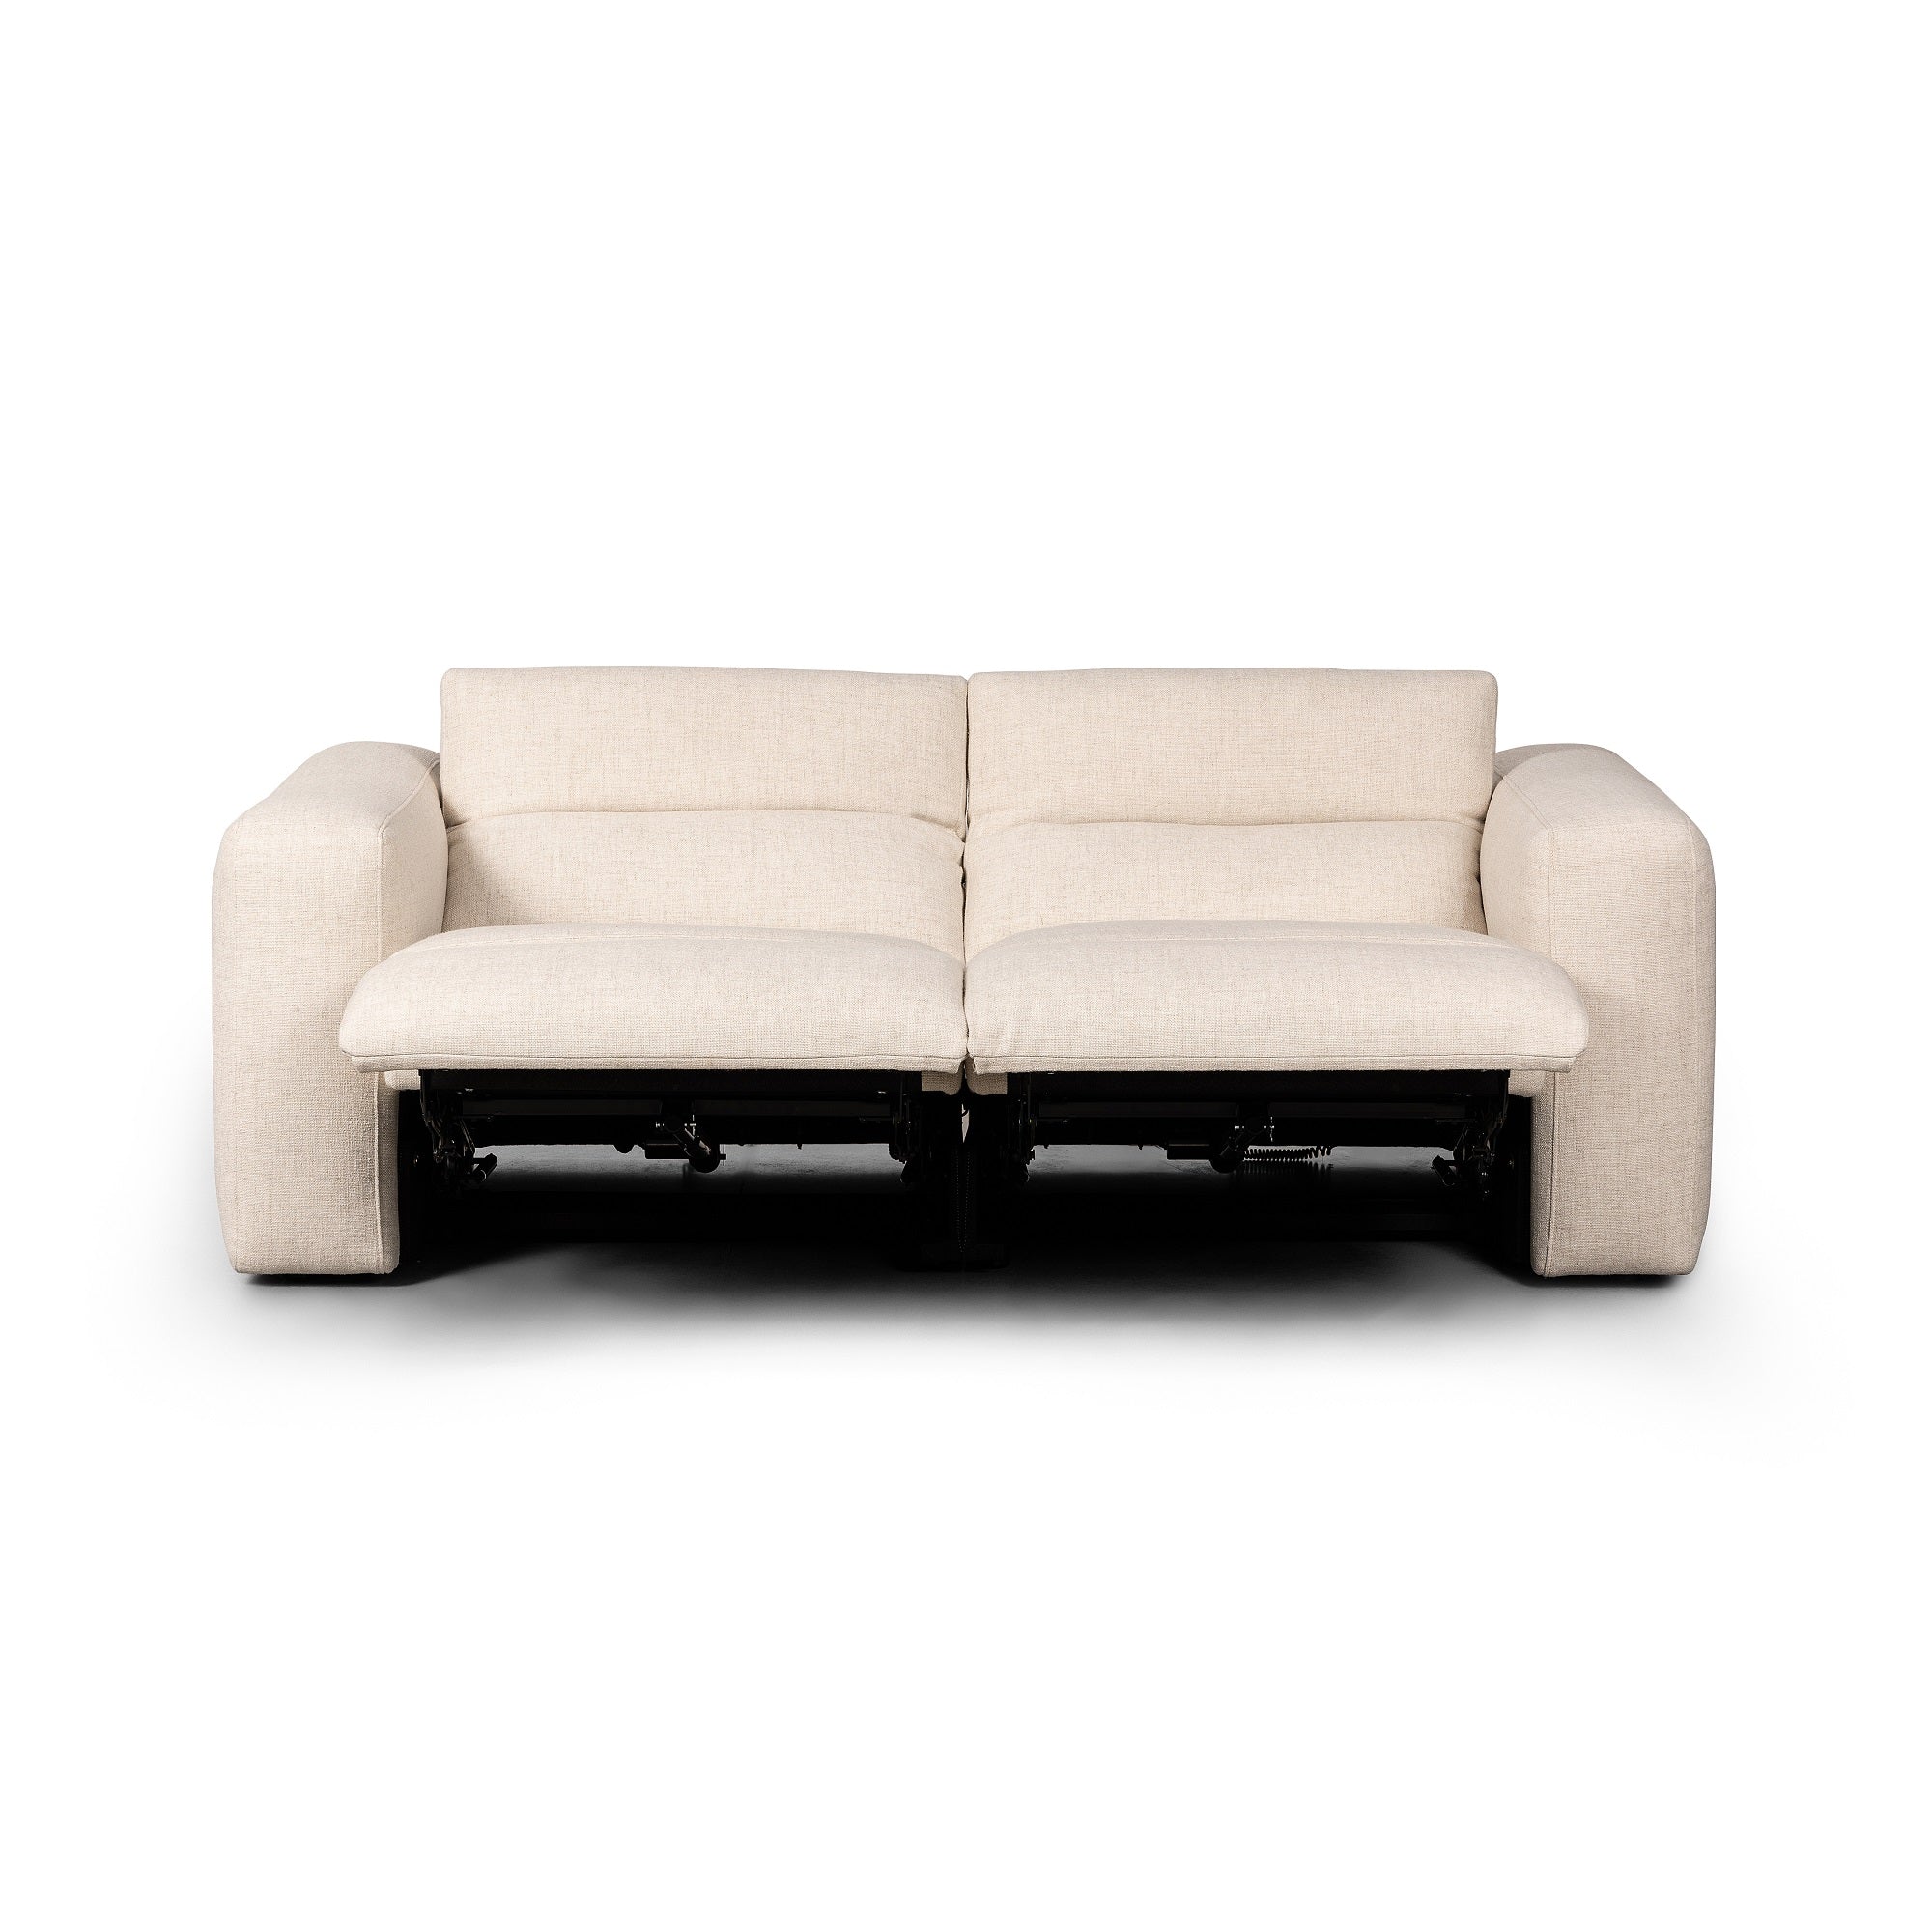 Baylor Power Recliner 2-piece Sectional